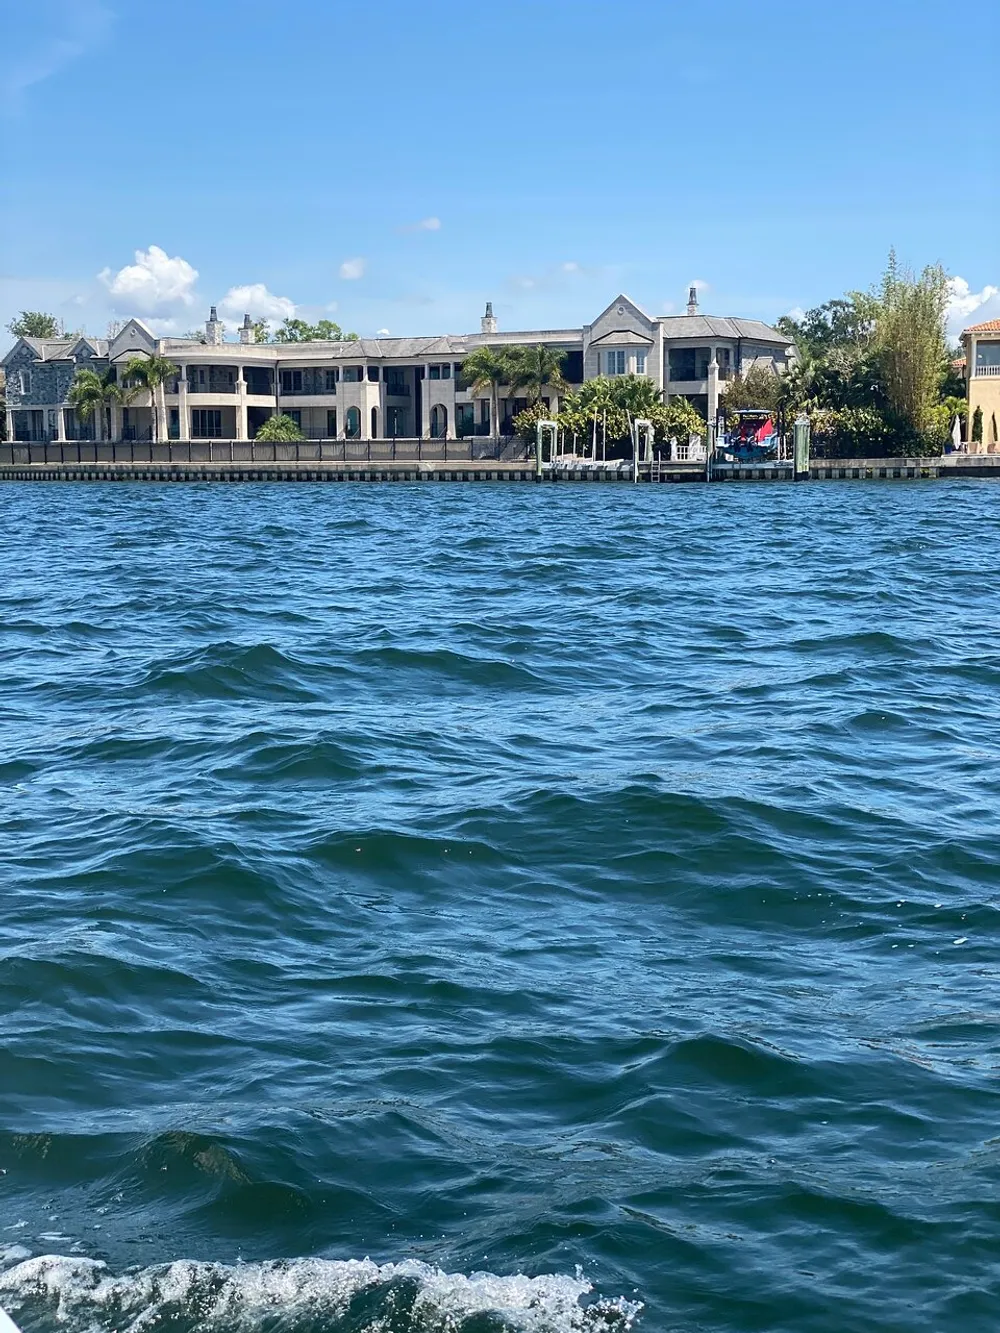 The image shows a view of a large sprawling waterfront house seen from across a body of choppy blue water under a clear sky